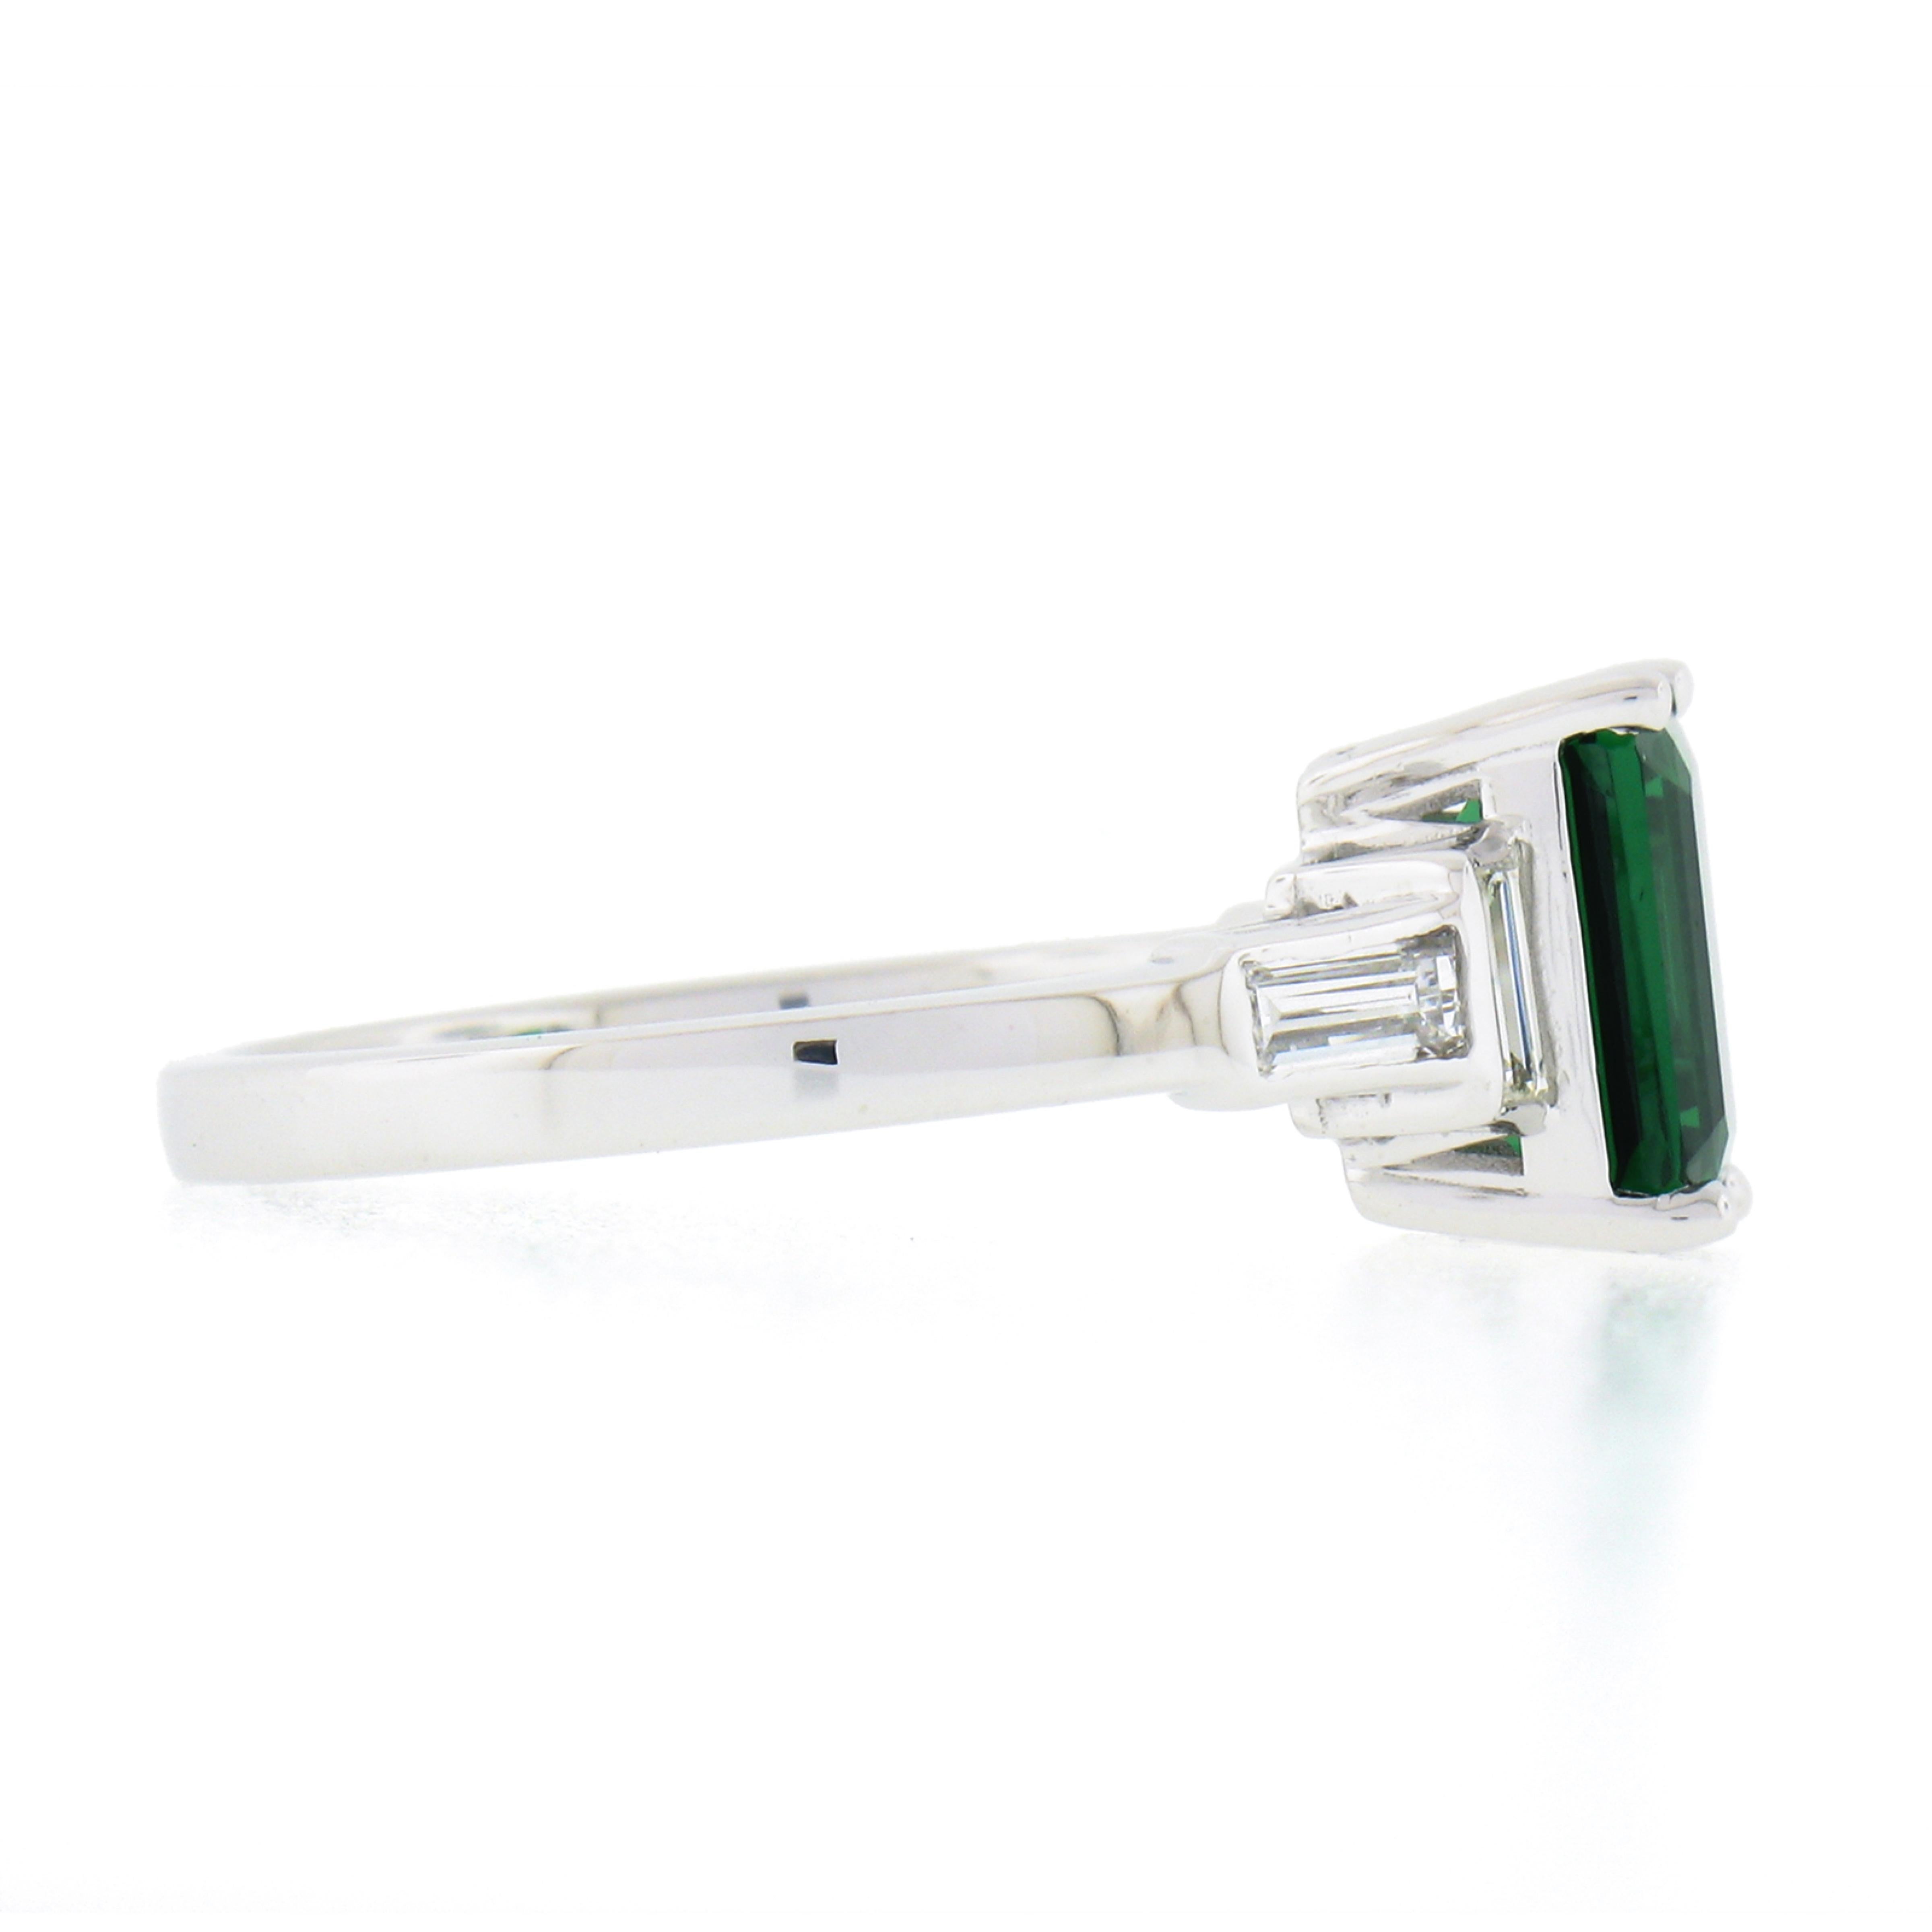 Here we have a fancy, and truly magnificent green tsavorite and diamond ring newly crafted in solid platinum. The ring features a natural, GIA certified, elongated emerald step cut green tsavorite that weighs exactly 2.03 carats and is neatly prong